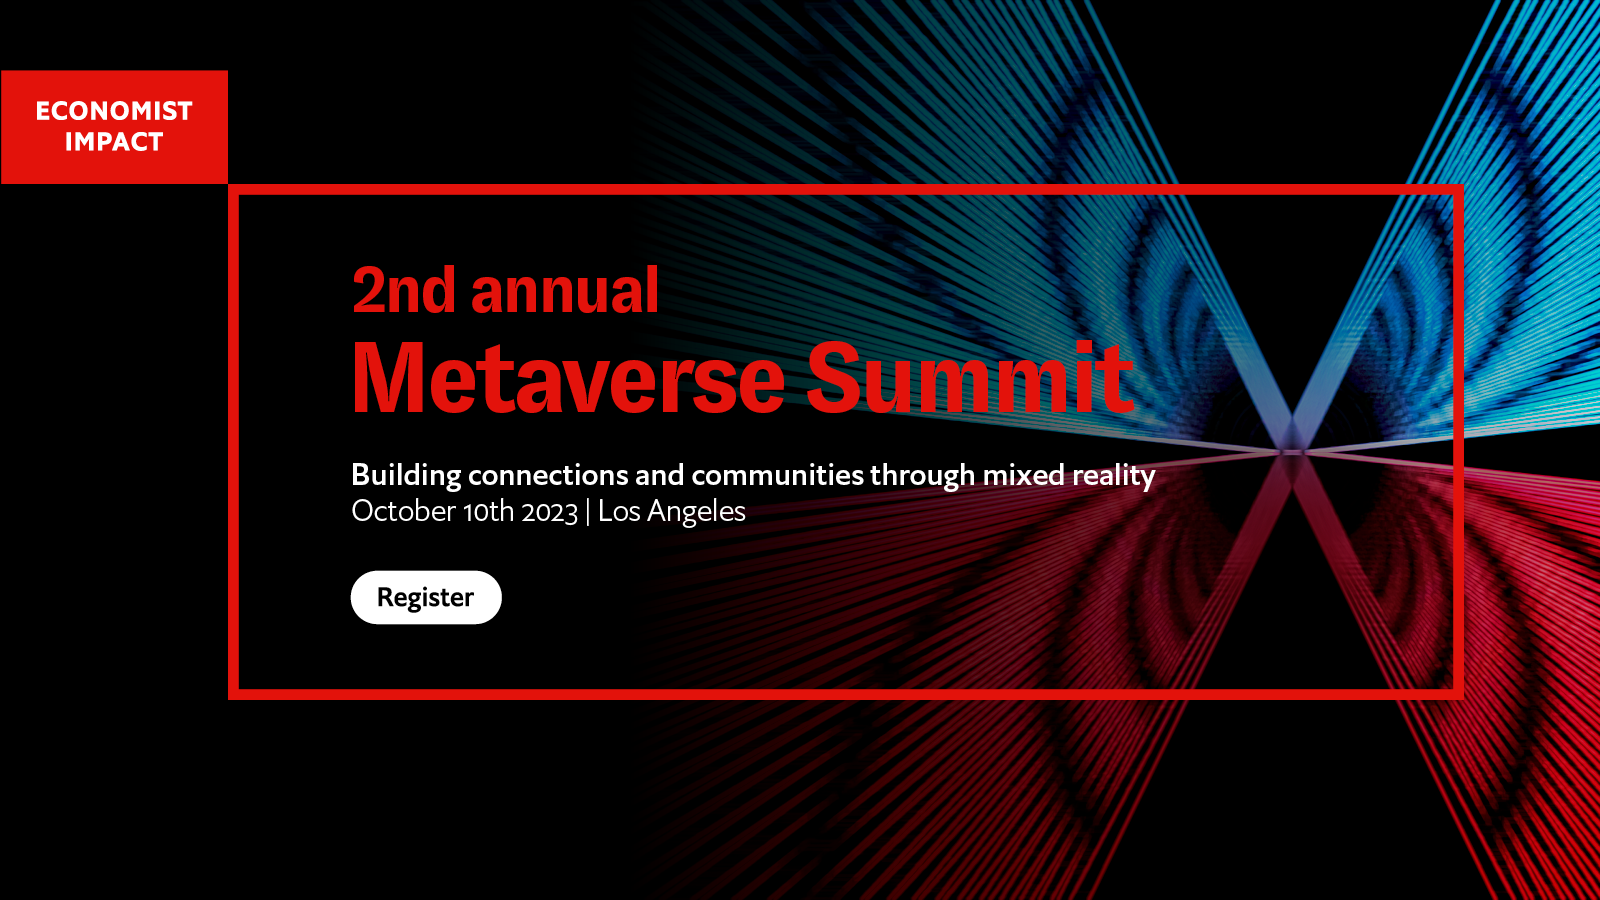 LEARN ABOUT BUILDING CONNECTIONS AND COMMUNITIES THROUGH MIXED REALITY AT THE SECOND ANNUAL METAVERSE SUMMIT 2023